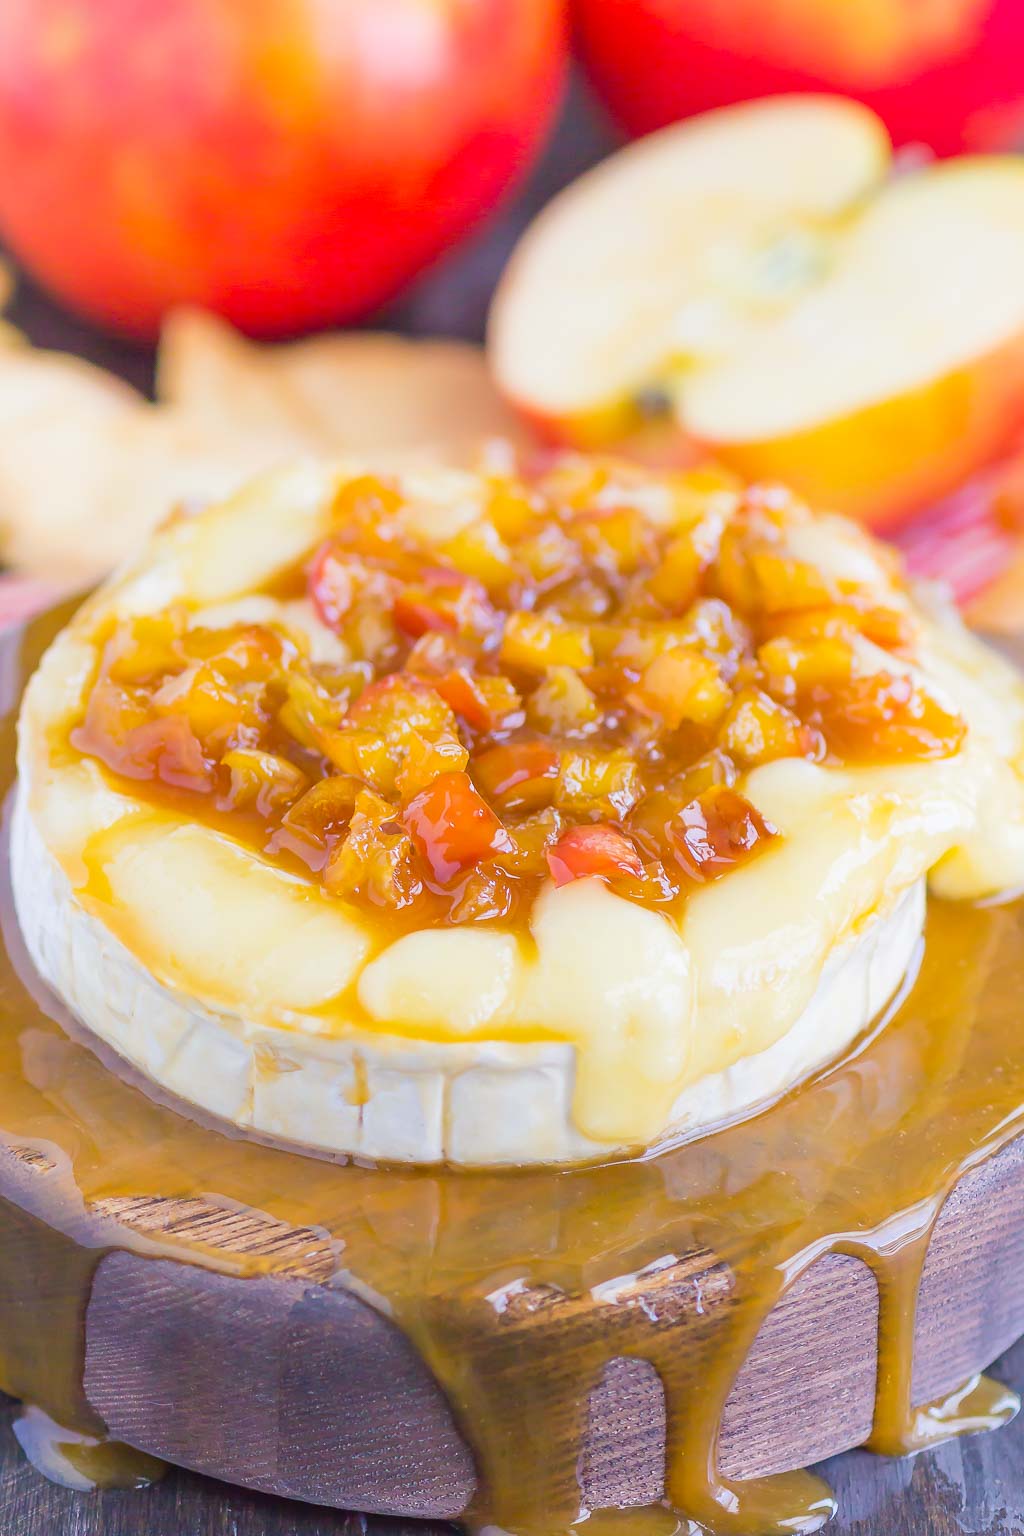 Caramel Apple Baked Brie is an easy appetizer that's ready in just 10 minutes. Fresh apples are sautÃ©ed in a buttery brown sugar mixture, drizzled with caramel, and then added to the melty brie. Perfect to serve with pita chips or apple slices, this gooey cheese is guaranteed to be a hit all year long! #brie #bakedbrie #caramel #apples #caramelapple #appetizer #brierecipe #fall recipe #fallappetizer #recipe